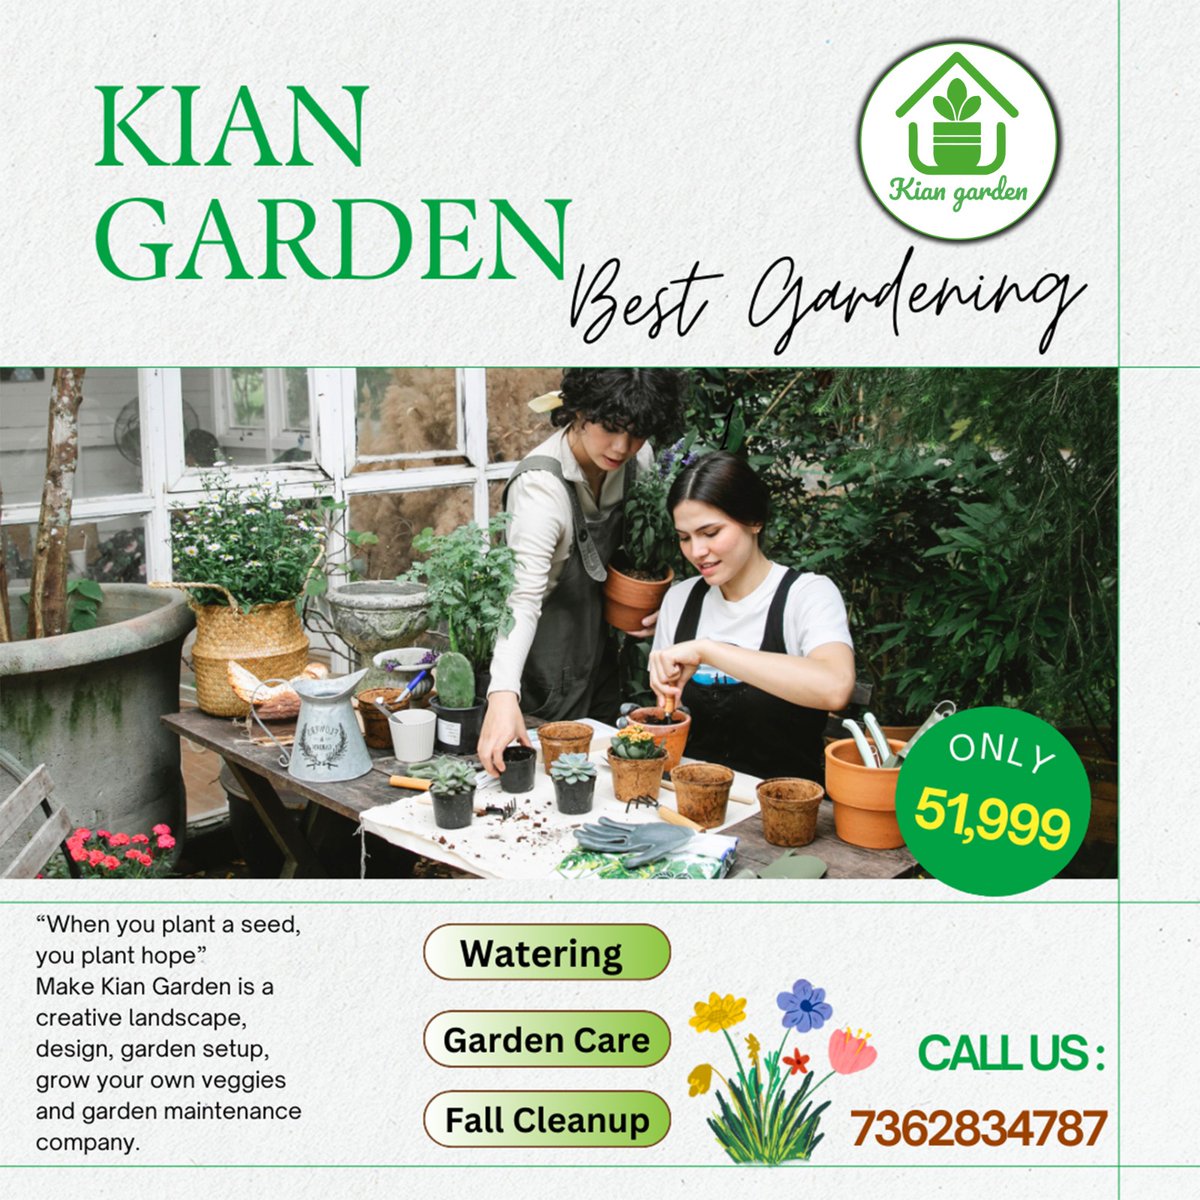 🌱 Welcome to 𝗞𝗜𝗔𝗡 𝗚𝗔𝗥𝗗𝗘𝗡 Gardening Services! 🌿

Transform your outdoor oasis with our expert touch! 🌻

At 𝗞𝗜𝗔𝗡 𝗚𝗔𝗥𝗗𝗘𝗡, we're passionate about 𝒏𝒖𝒓𝒕𝒖𝒓𝒊𝒏𝒈 𝒚𝒐𝒖𝒓 𝒈𝒓𝒆𝒆𝒏 𝒔𝒑𝒂𝒄𝒆𝒔 𝒕𝒐 𝒑𝒆𝒓𝒇𝒆𝒄𝒕𝒊𝒐𝒏. 

#gardenarea #gardendecor #garden